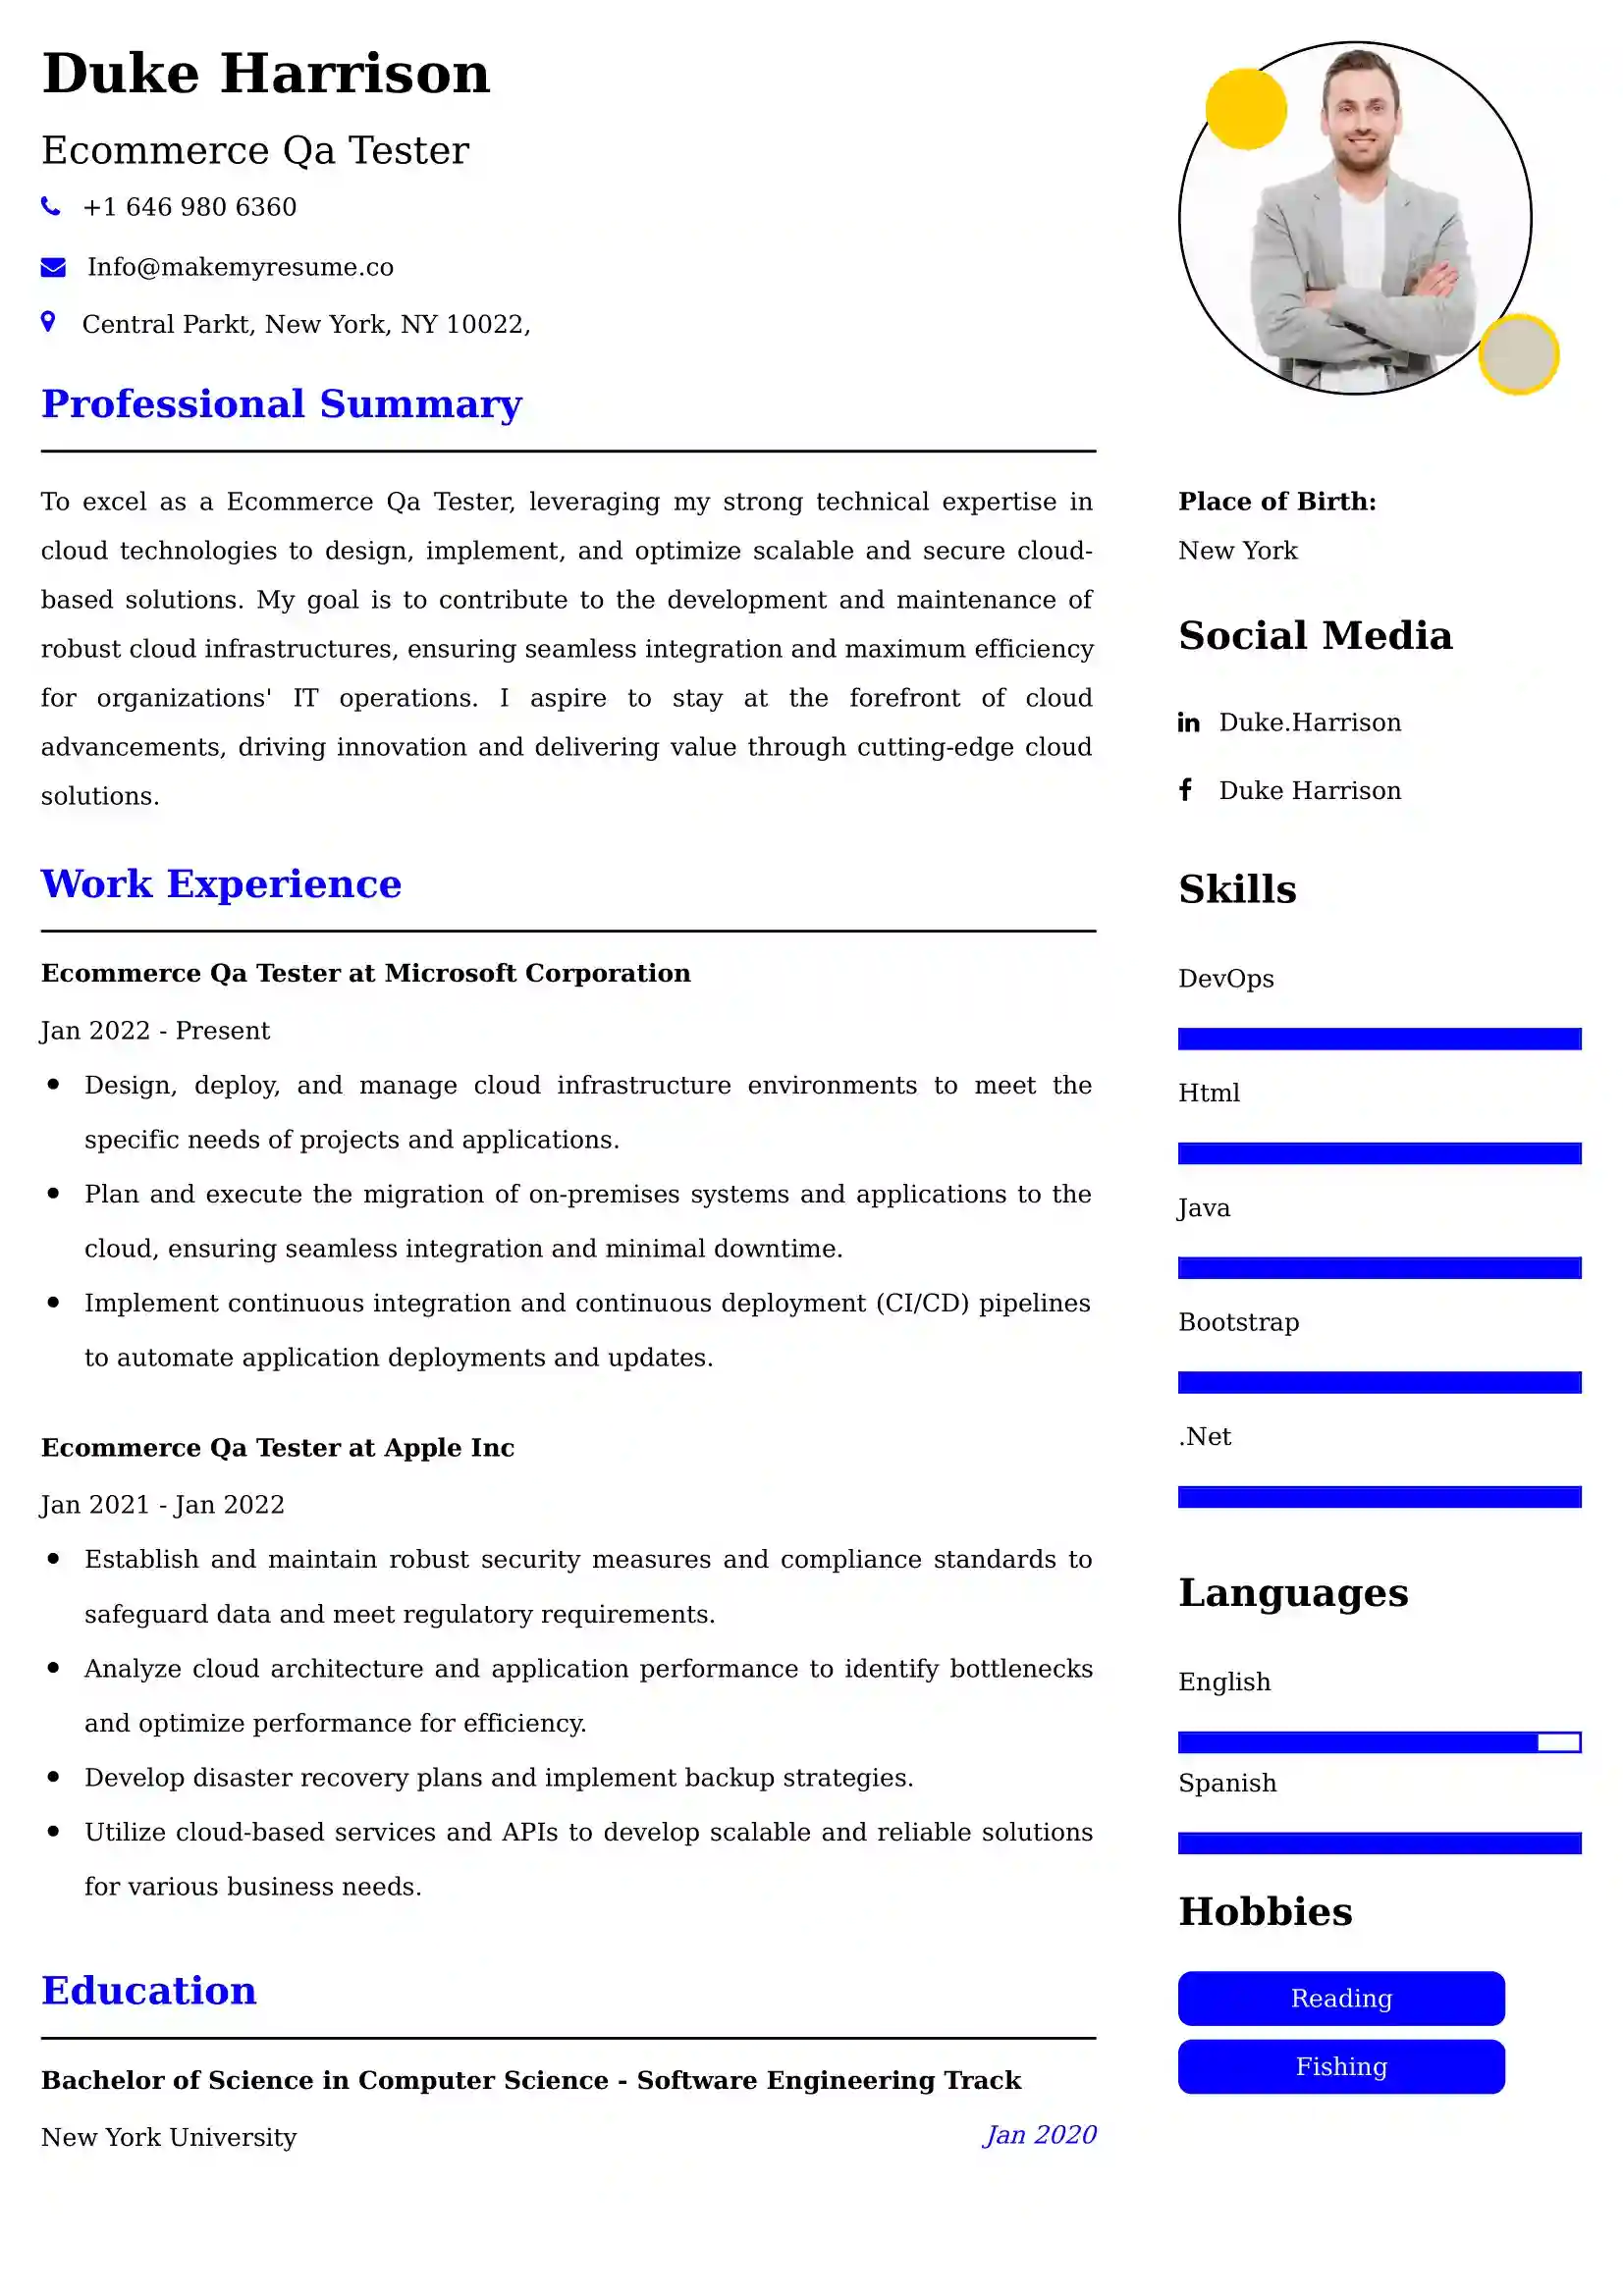 Ecommerce Qa Tester Resume Examples - Brazilian Format, Latest Template